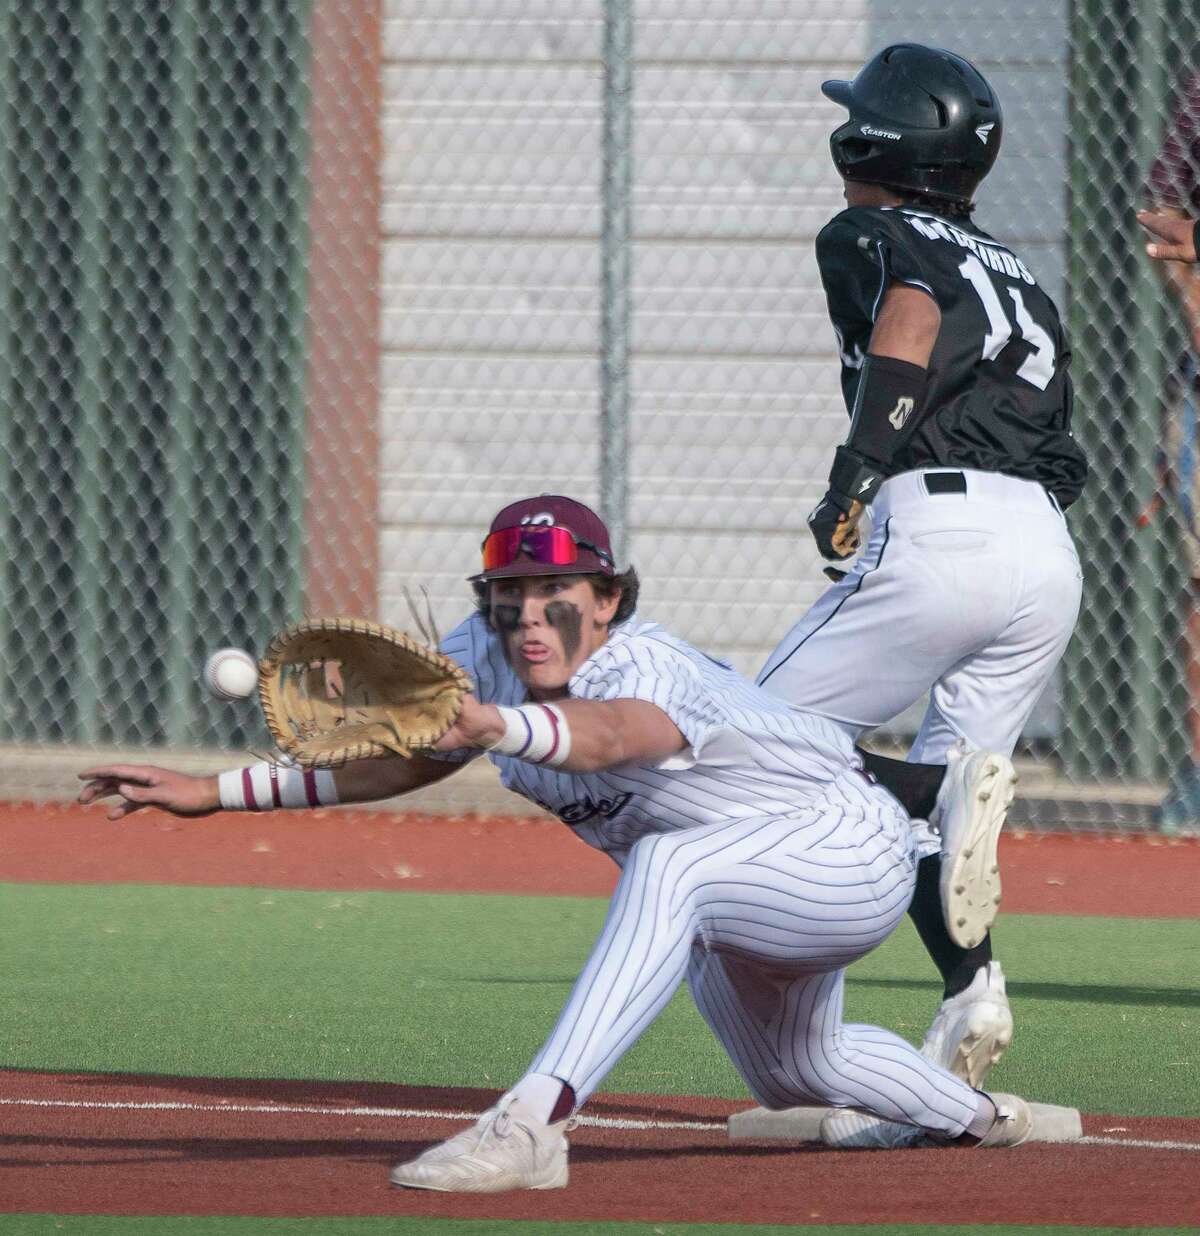 Legacy High's Chase Shores stretches for the ball on first but Abilene High's Jamison Castel beats the throw for a hit 04/26/2020 at Ernie Johnson Field. Tim Fischer/Reporter-Telegram